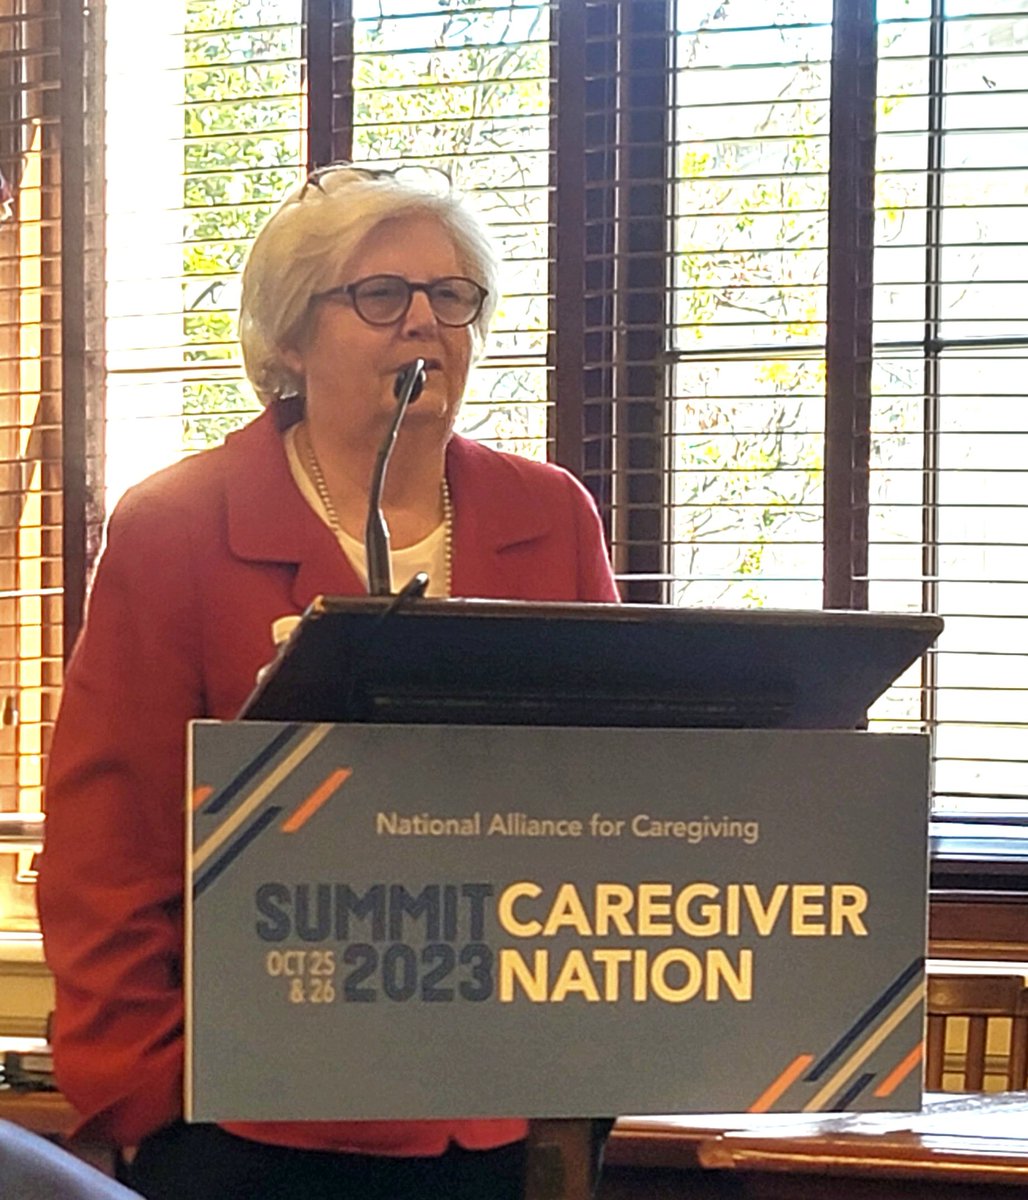 Speaking at the #ActonRaise Congressional Briefing, @NancyLeaMond sharing @AARP sustained commitment to family #caregivers, working at federal & state levels to drive change in part by 'moving the empathy of legislators to concrete action.' #caregivernation23